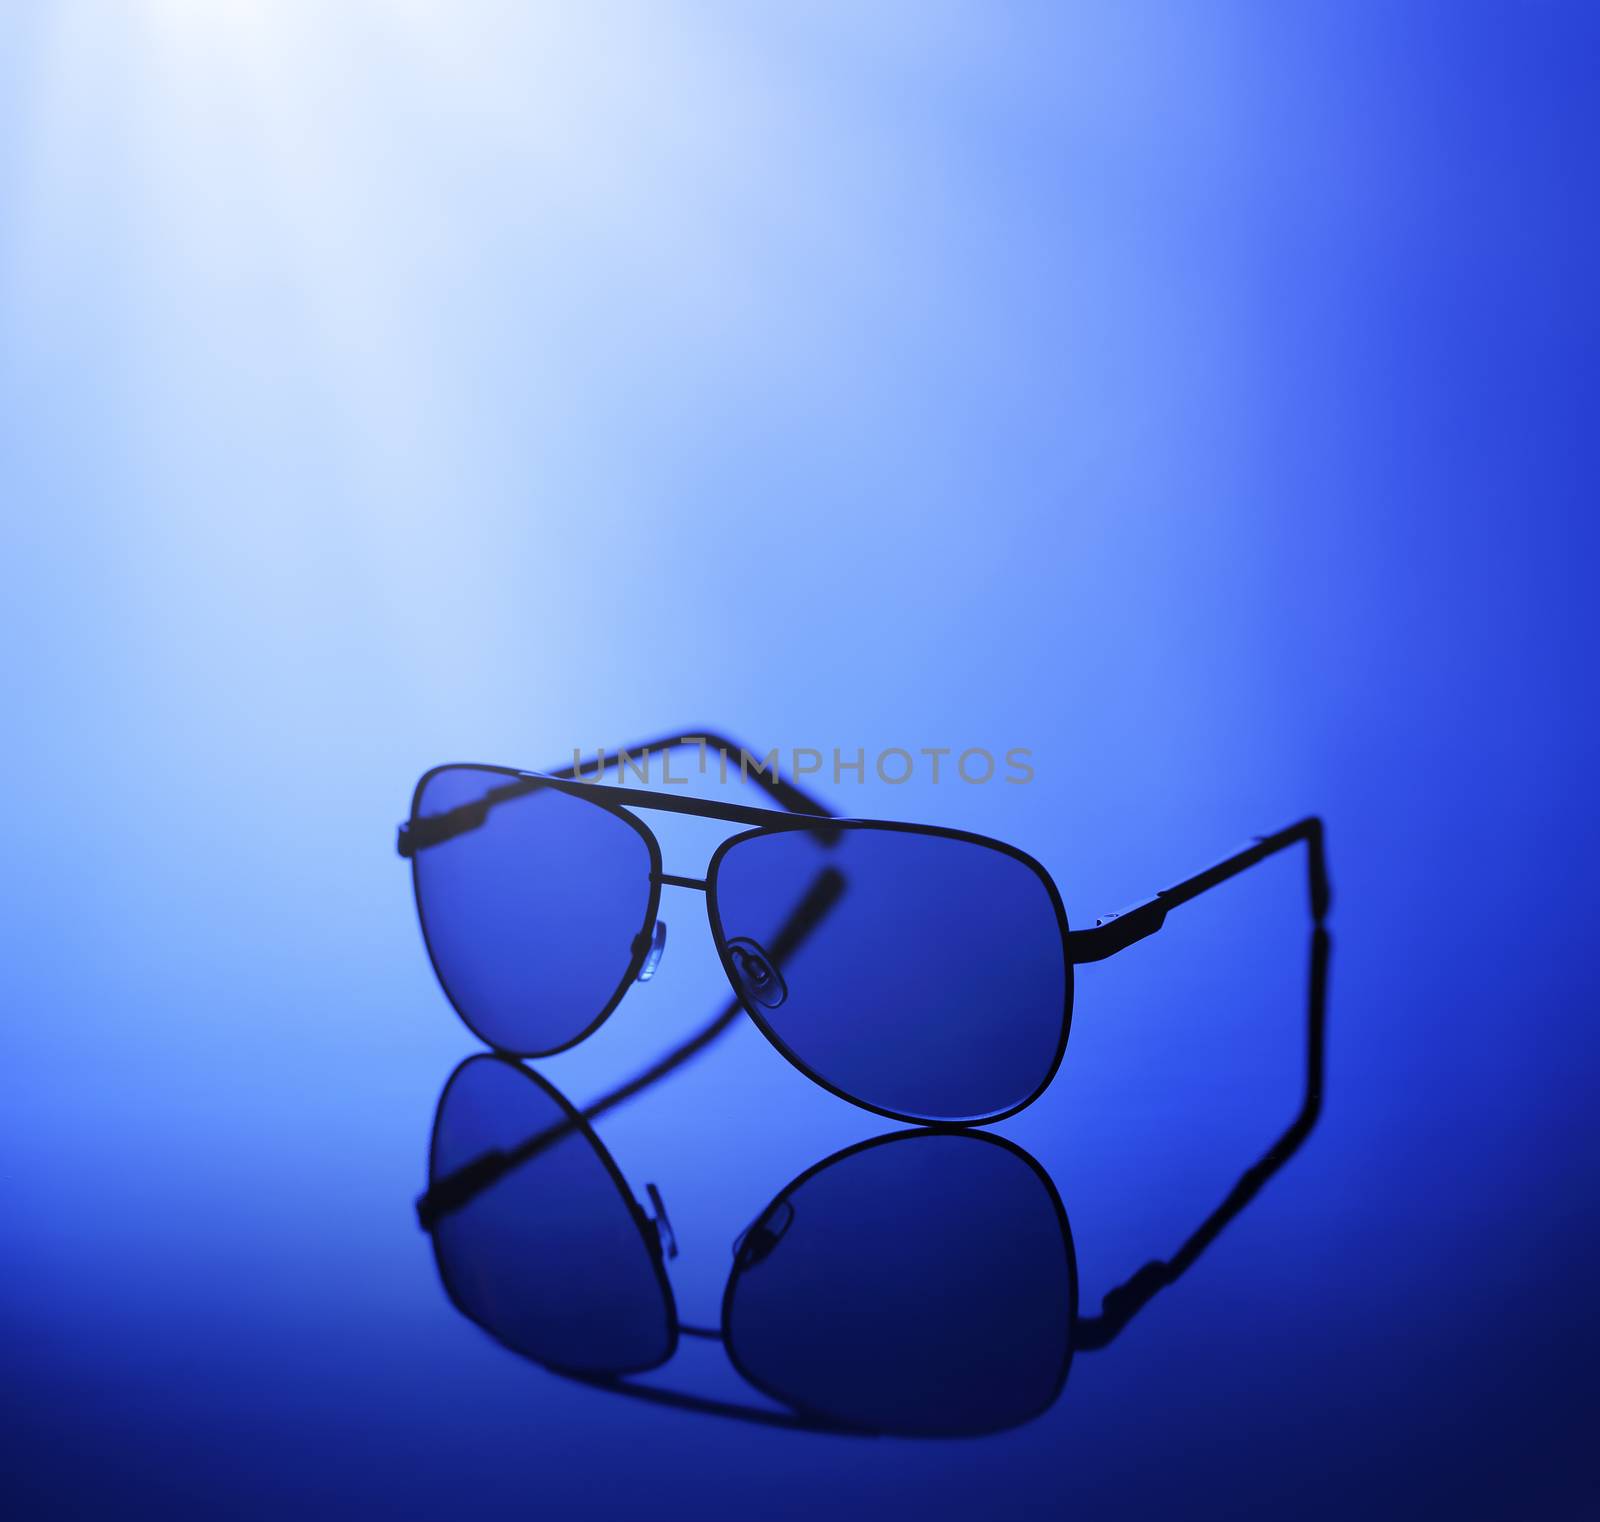 New Shades by Stocksnapper